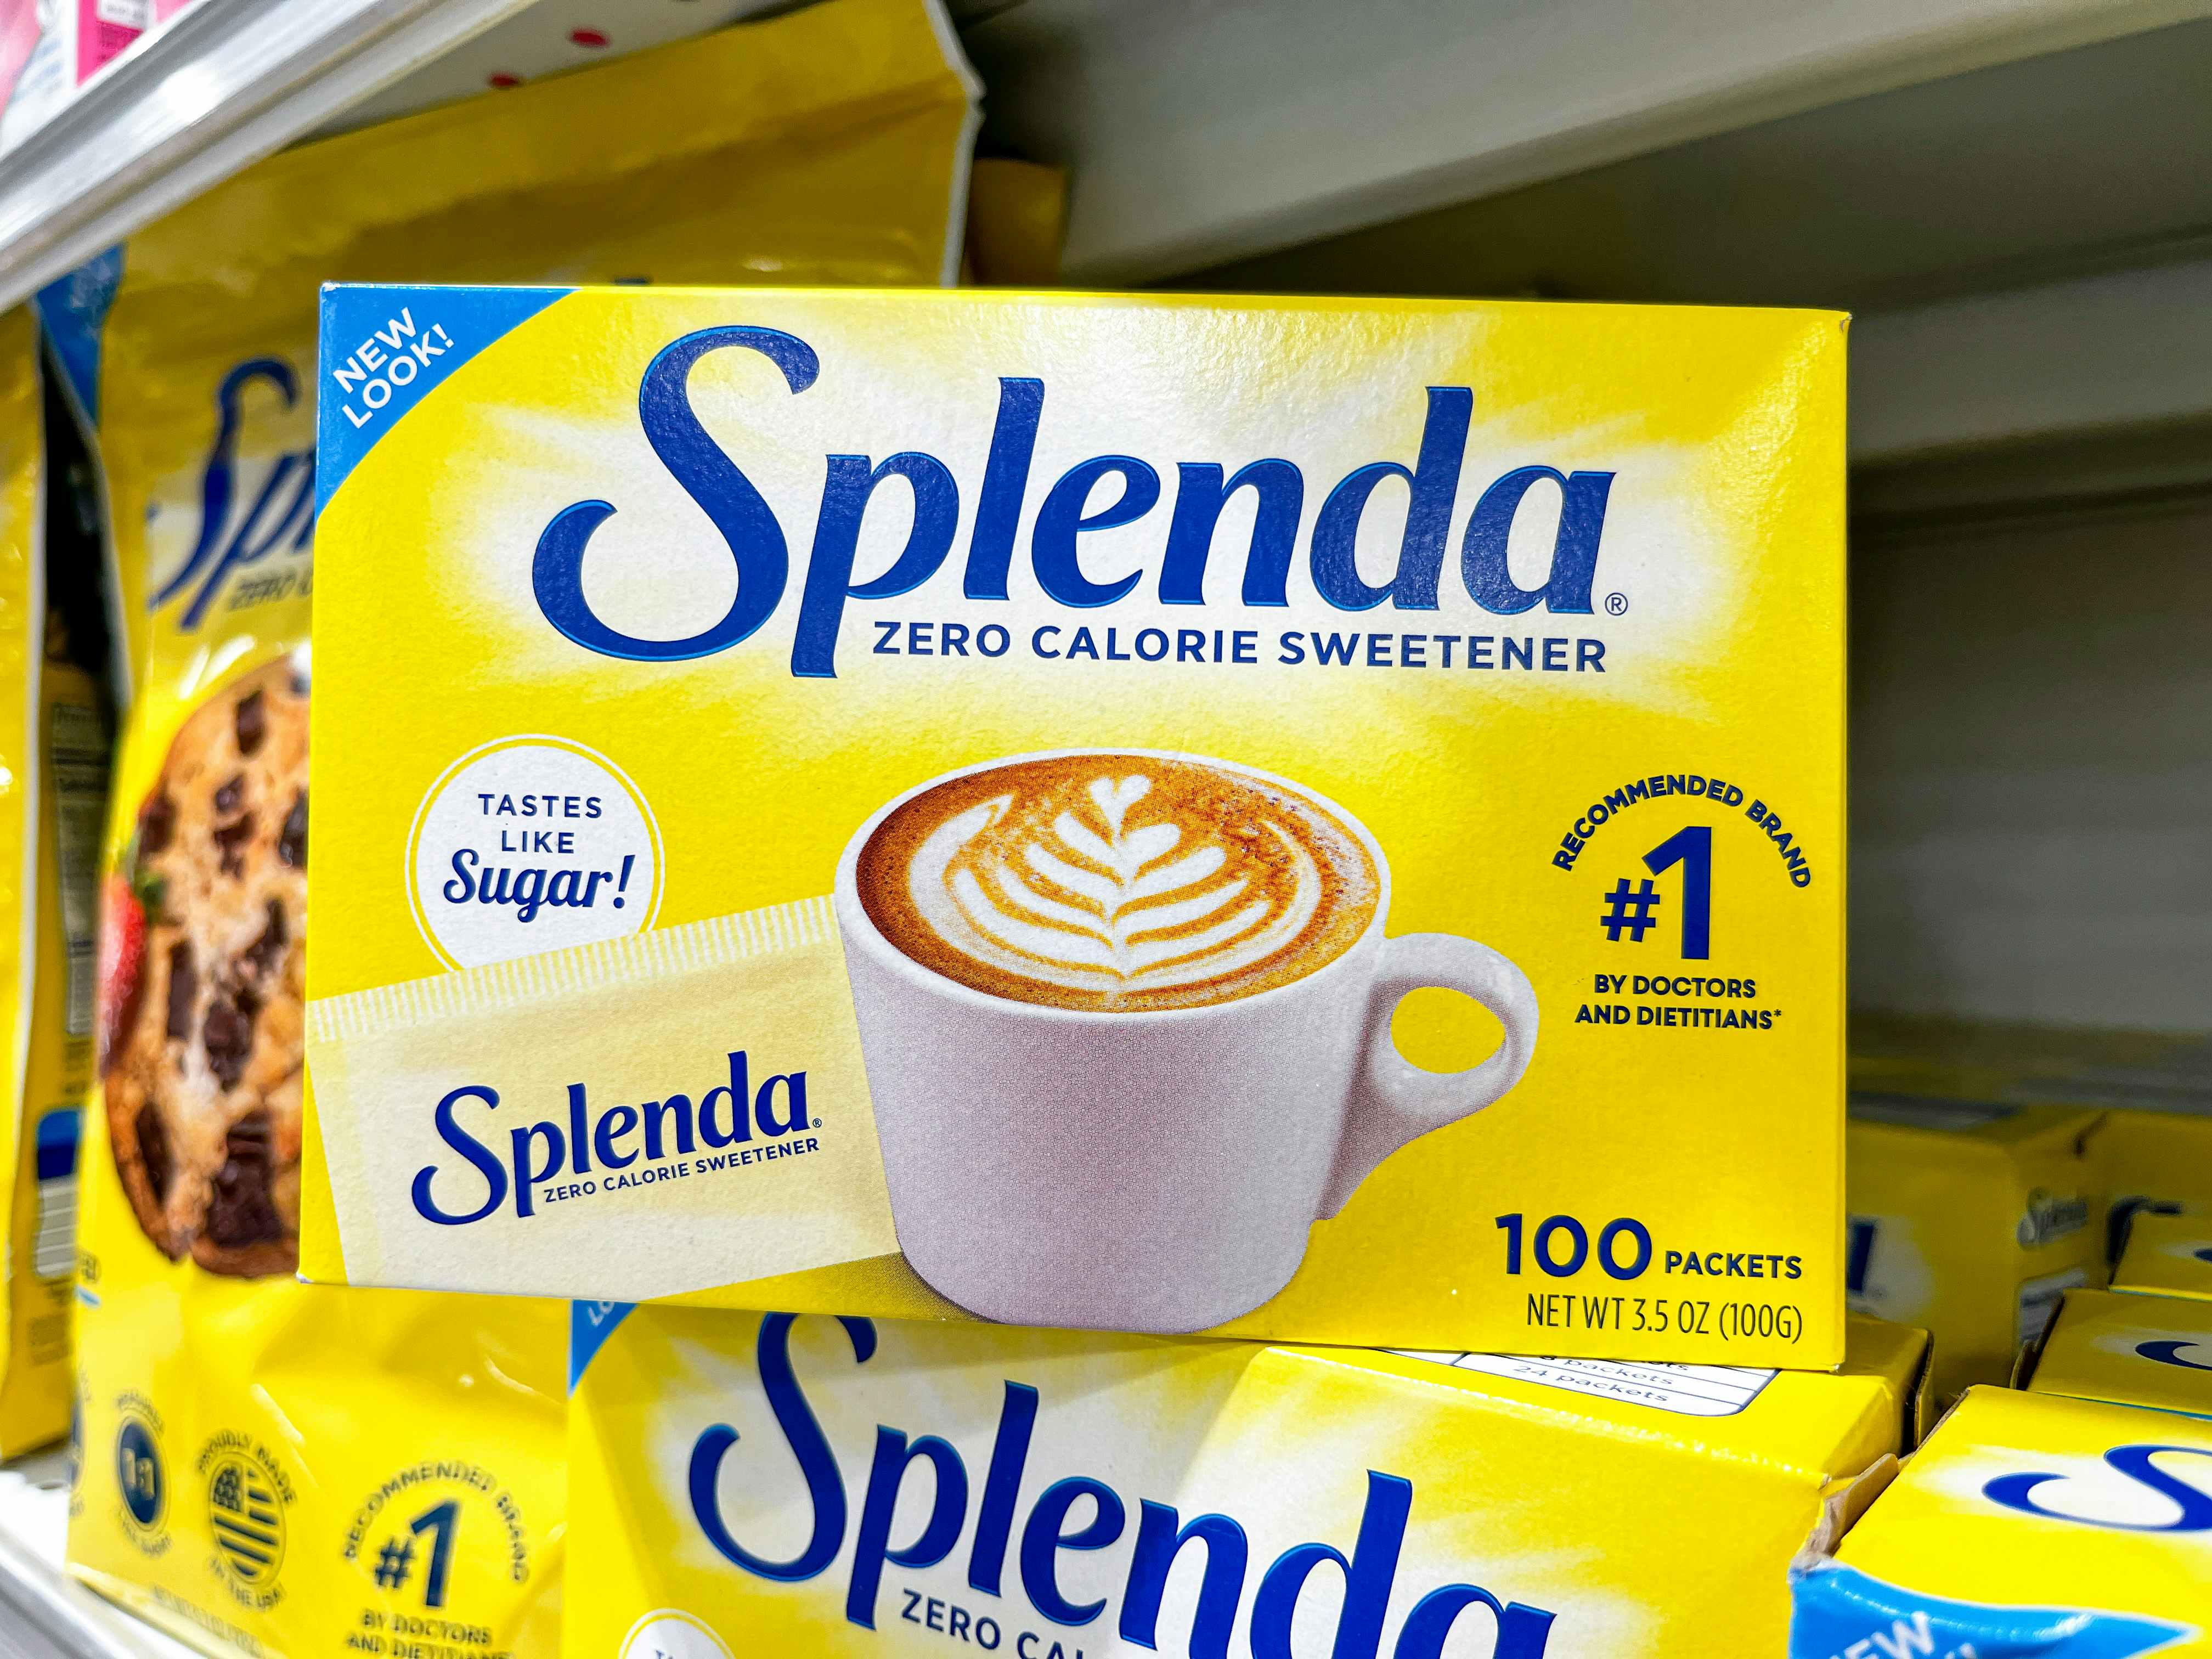 A box of 100 packets of Splenda sitting on another box of Splenda on the shelf at Publix.